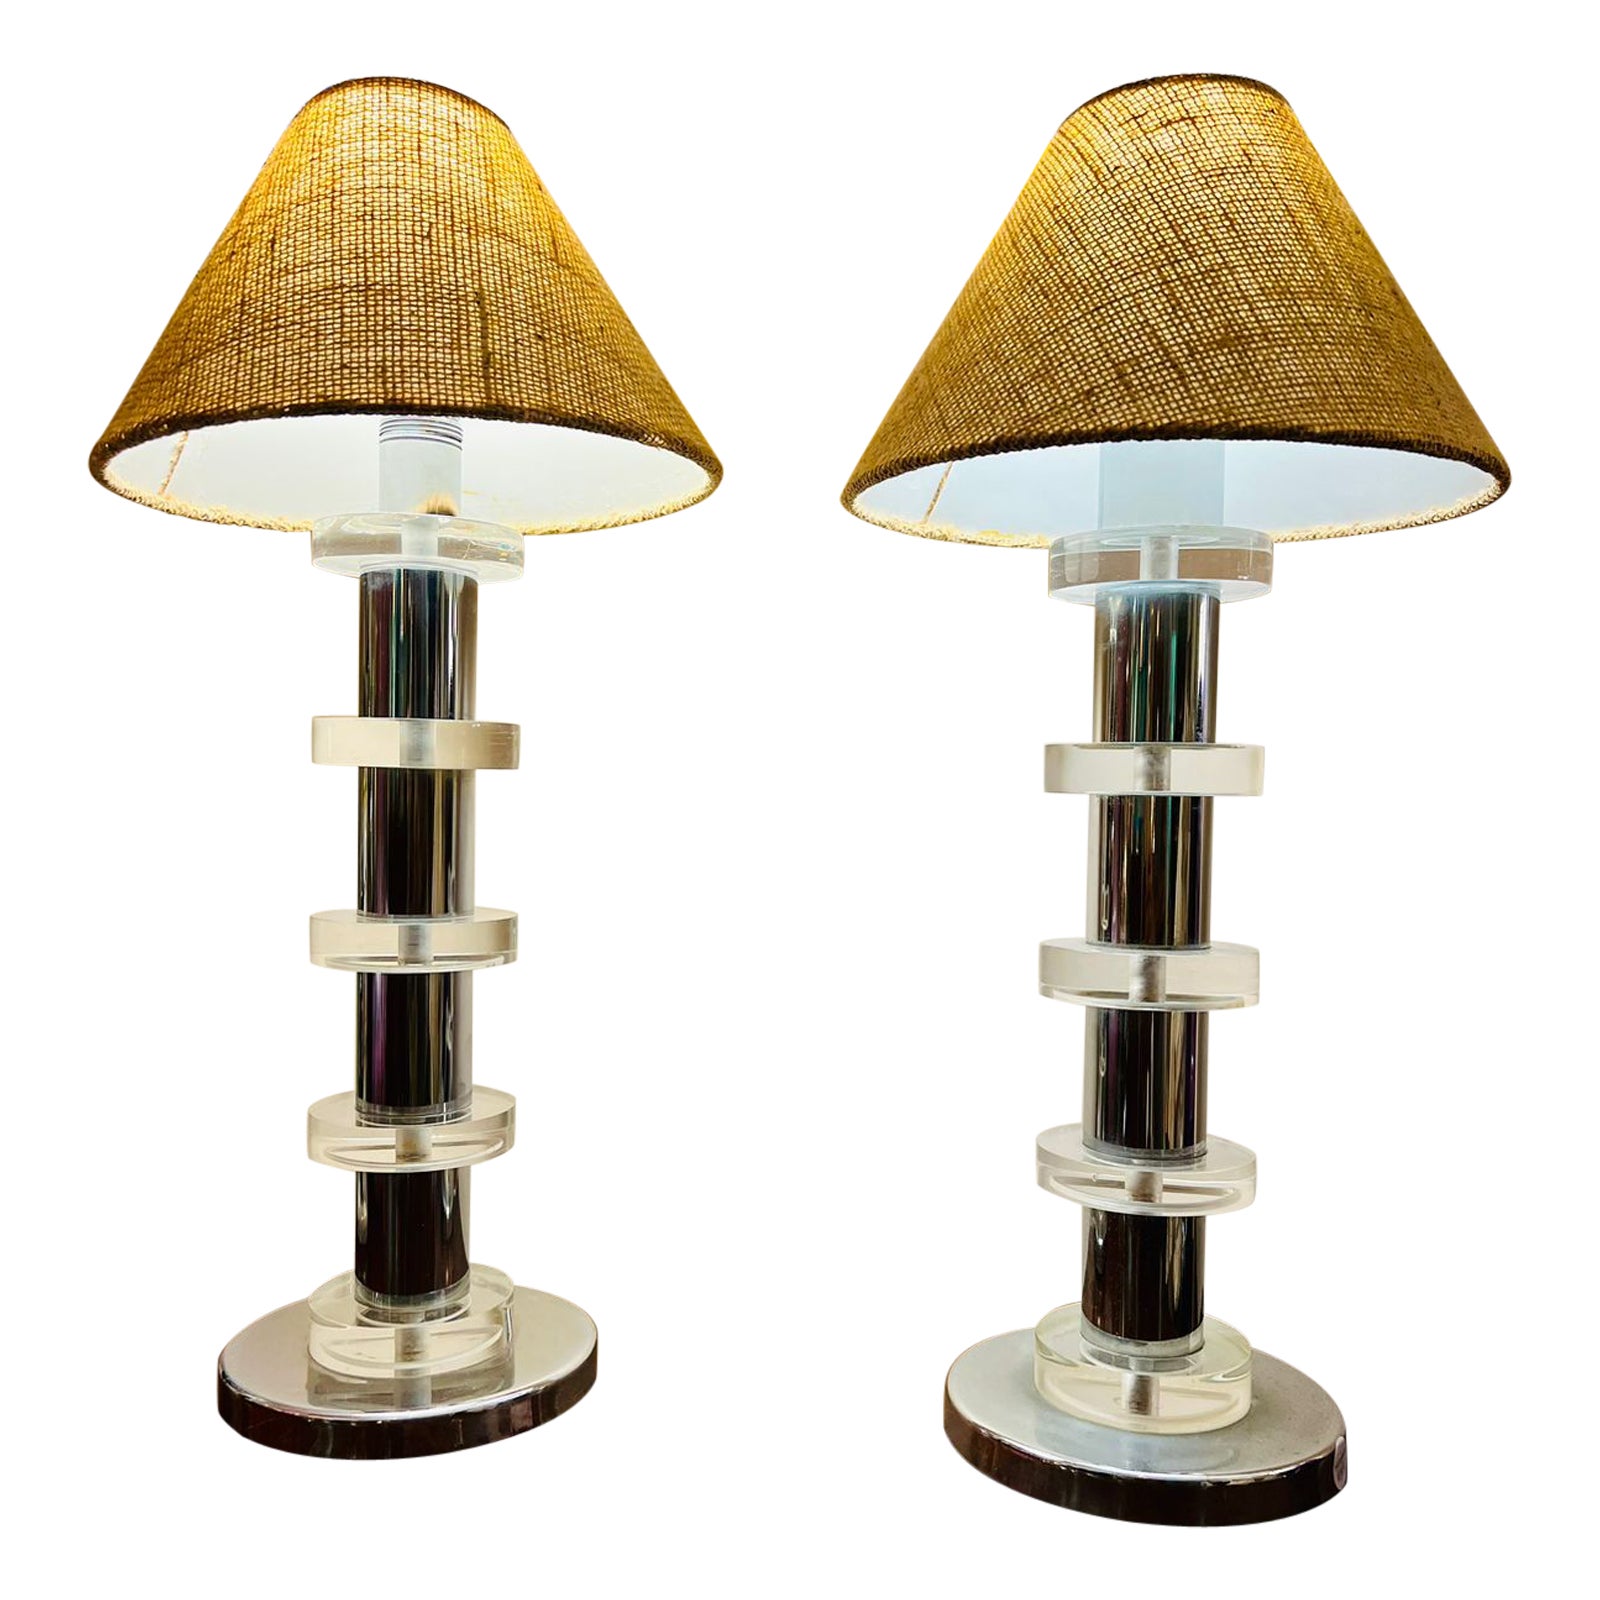 Karl Springer pair of table lamps in lucite and crome metal circa 1970